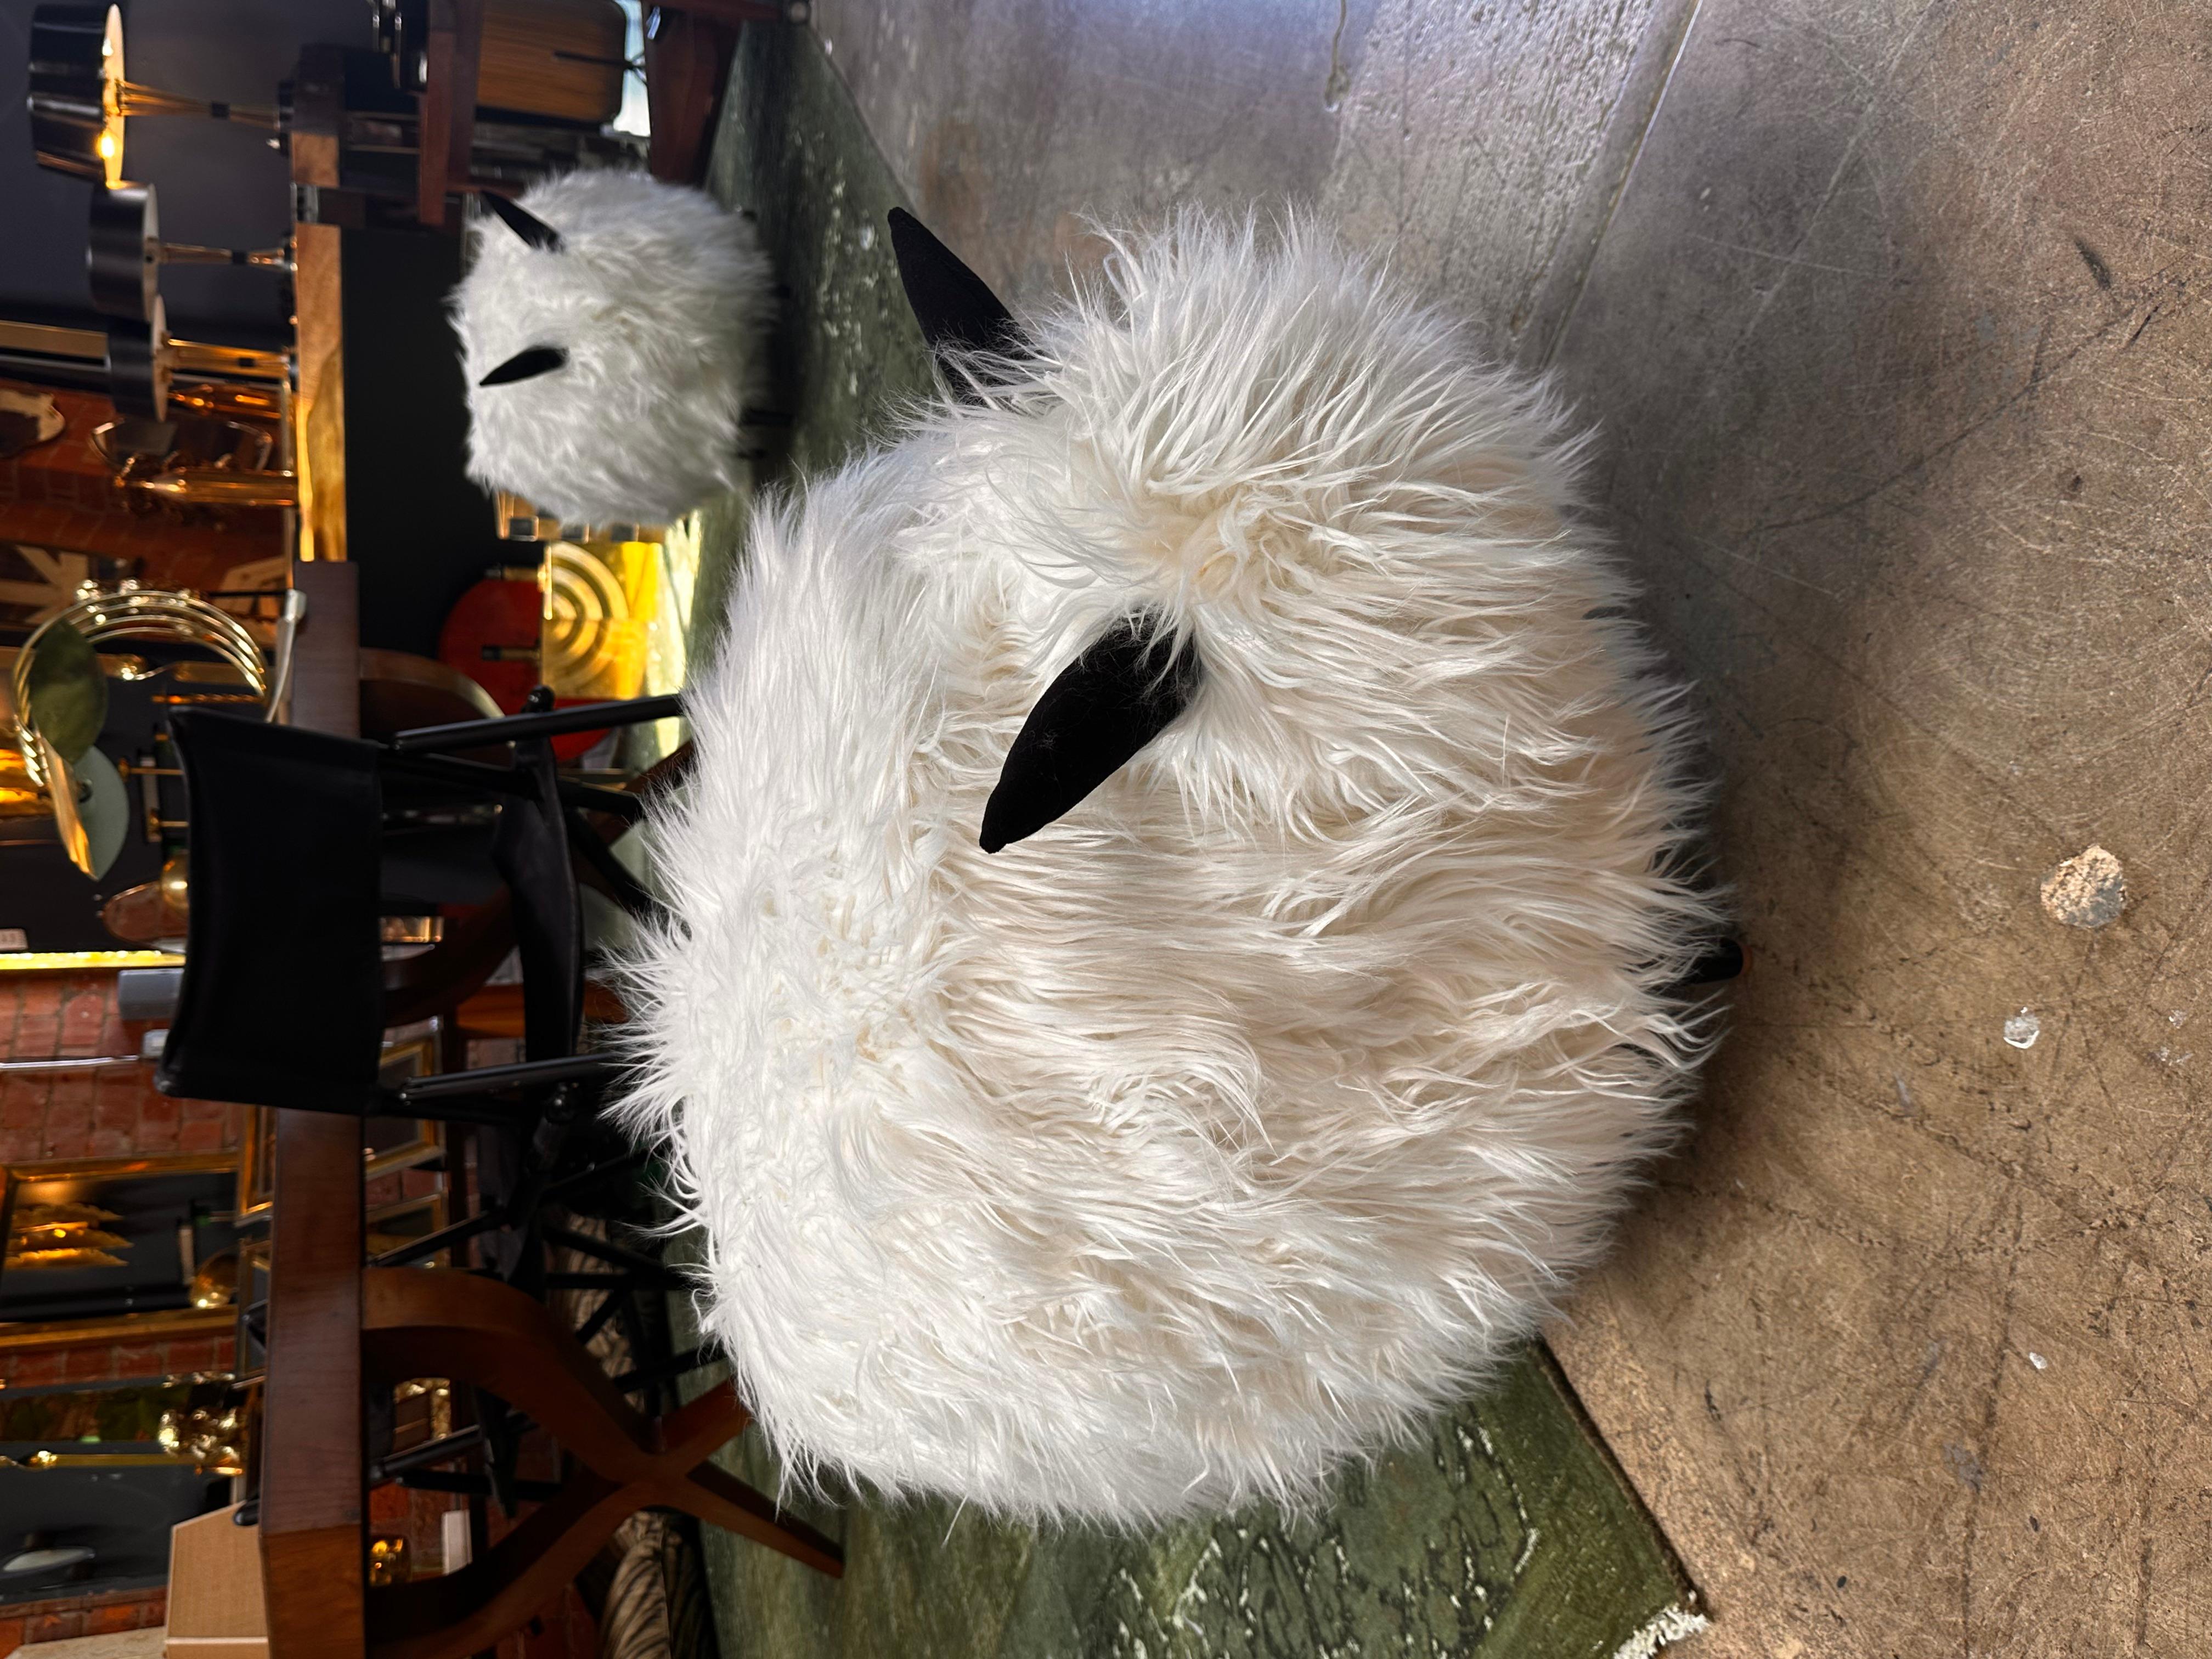 Ma39 Pouf in Carved Wood Sheep, Italy 21st Century
Customized Item: Material, Color fabric, Fabric

